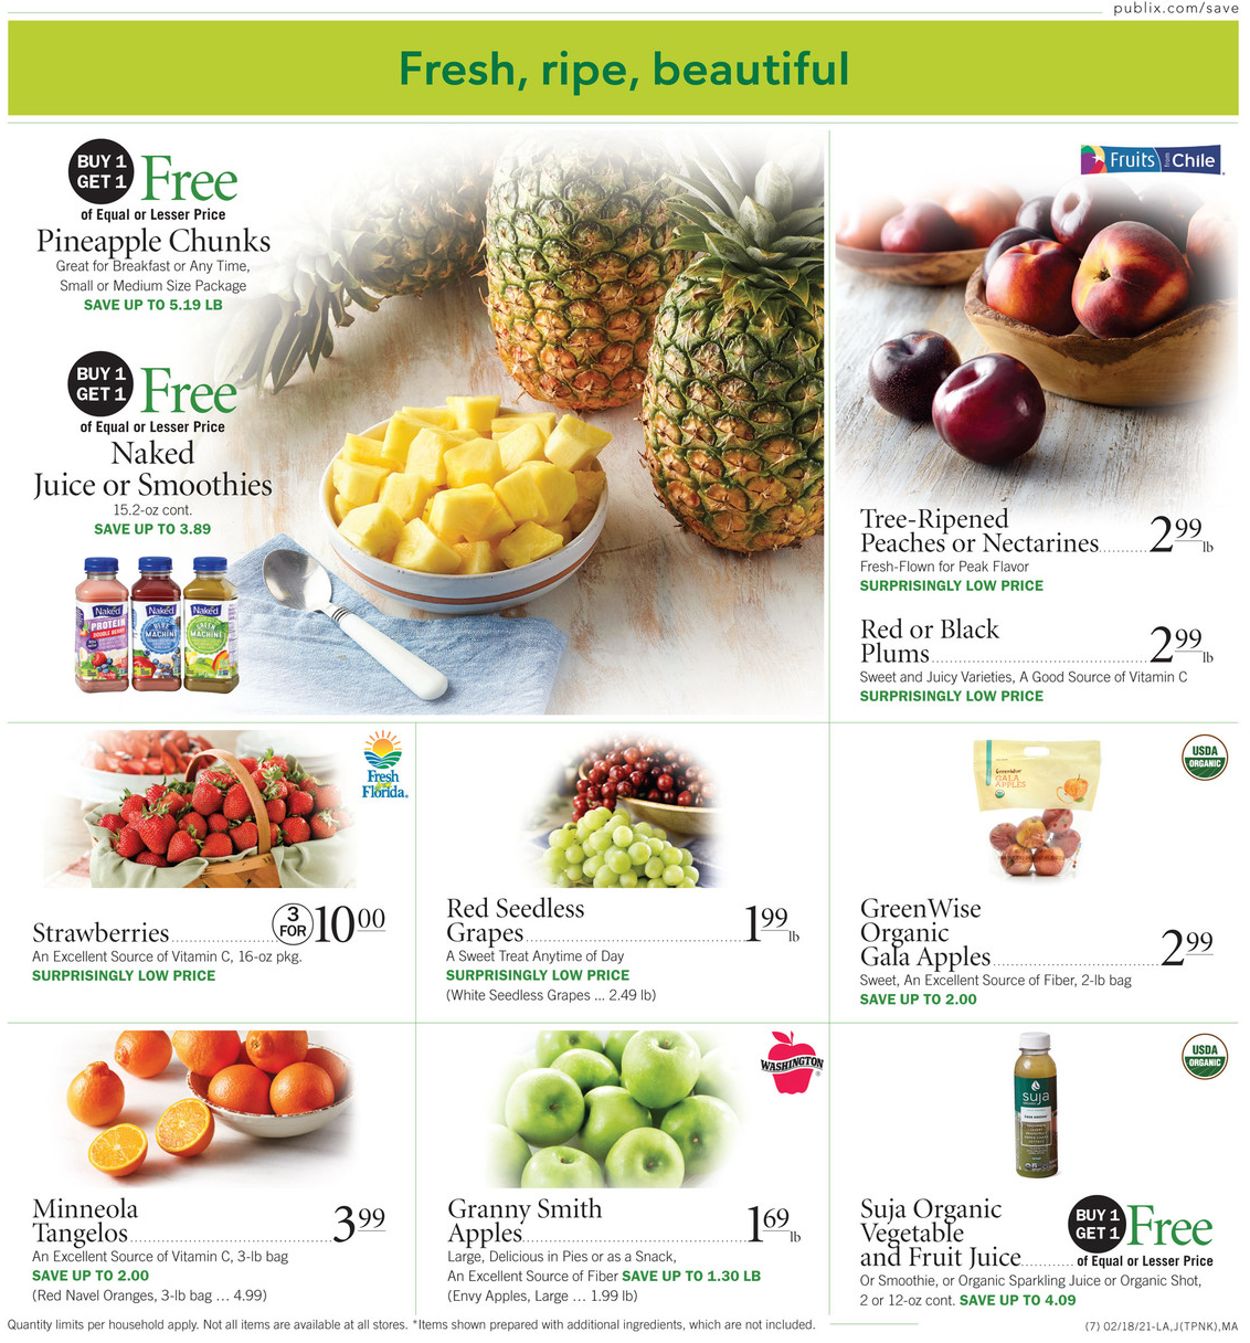 Publix Current weekly ad 02/18 - 02/24/2021 [7] - frequent-ads.com